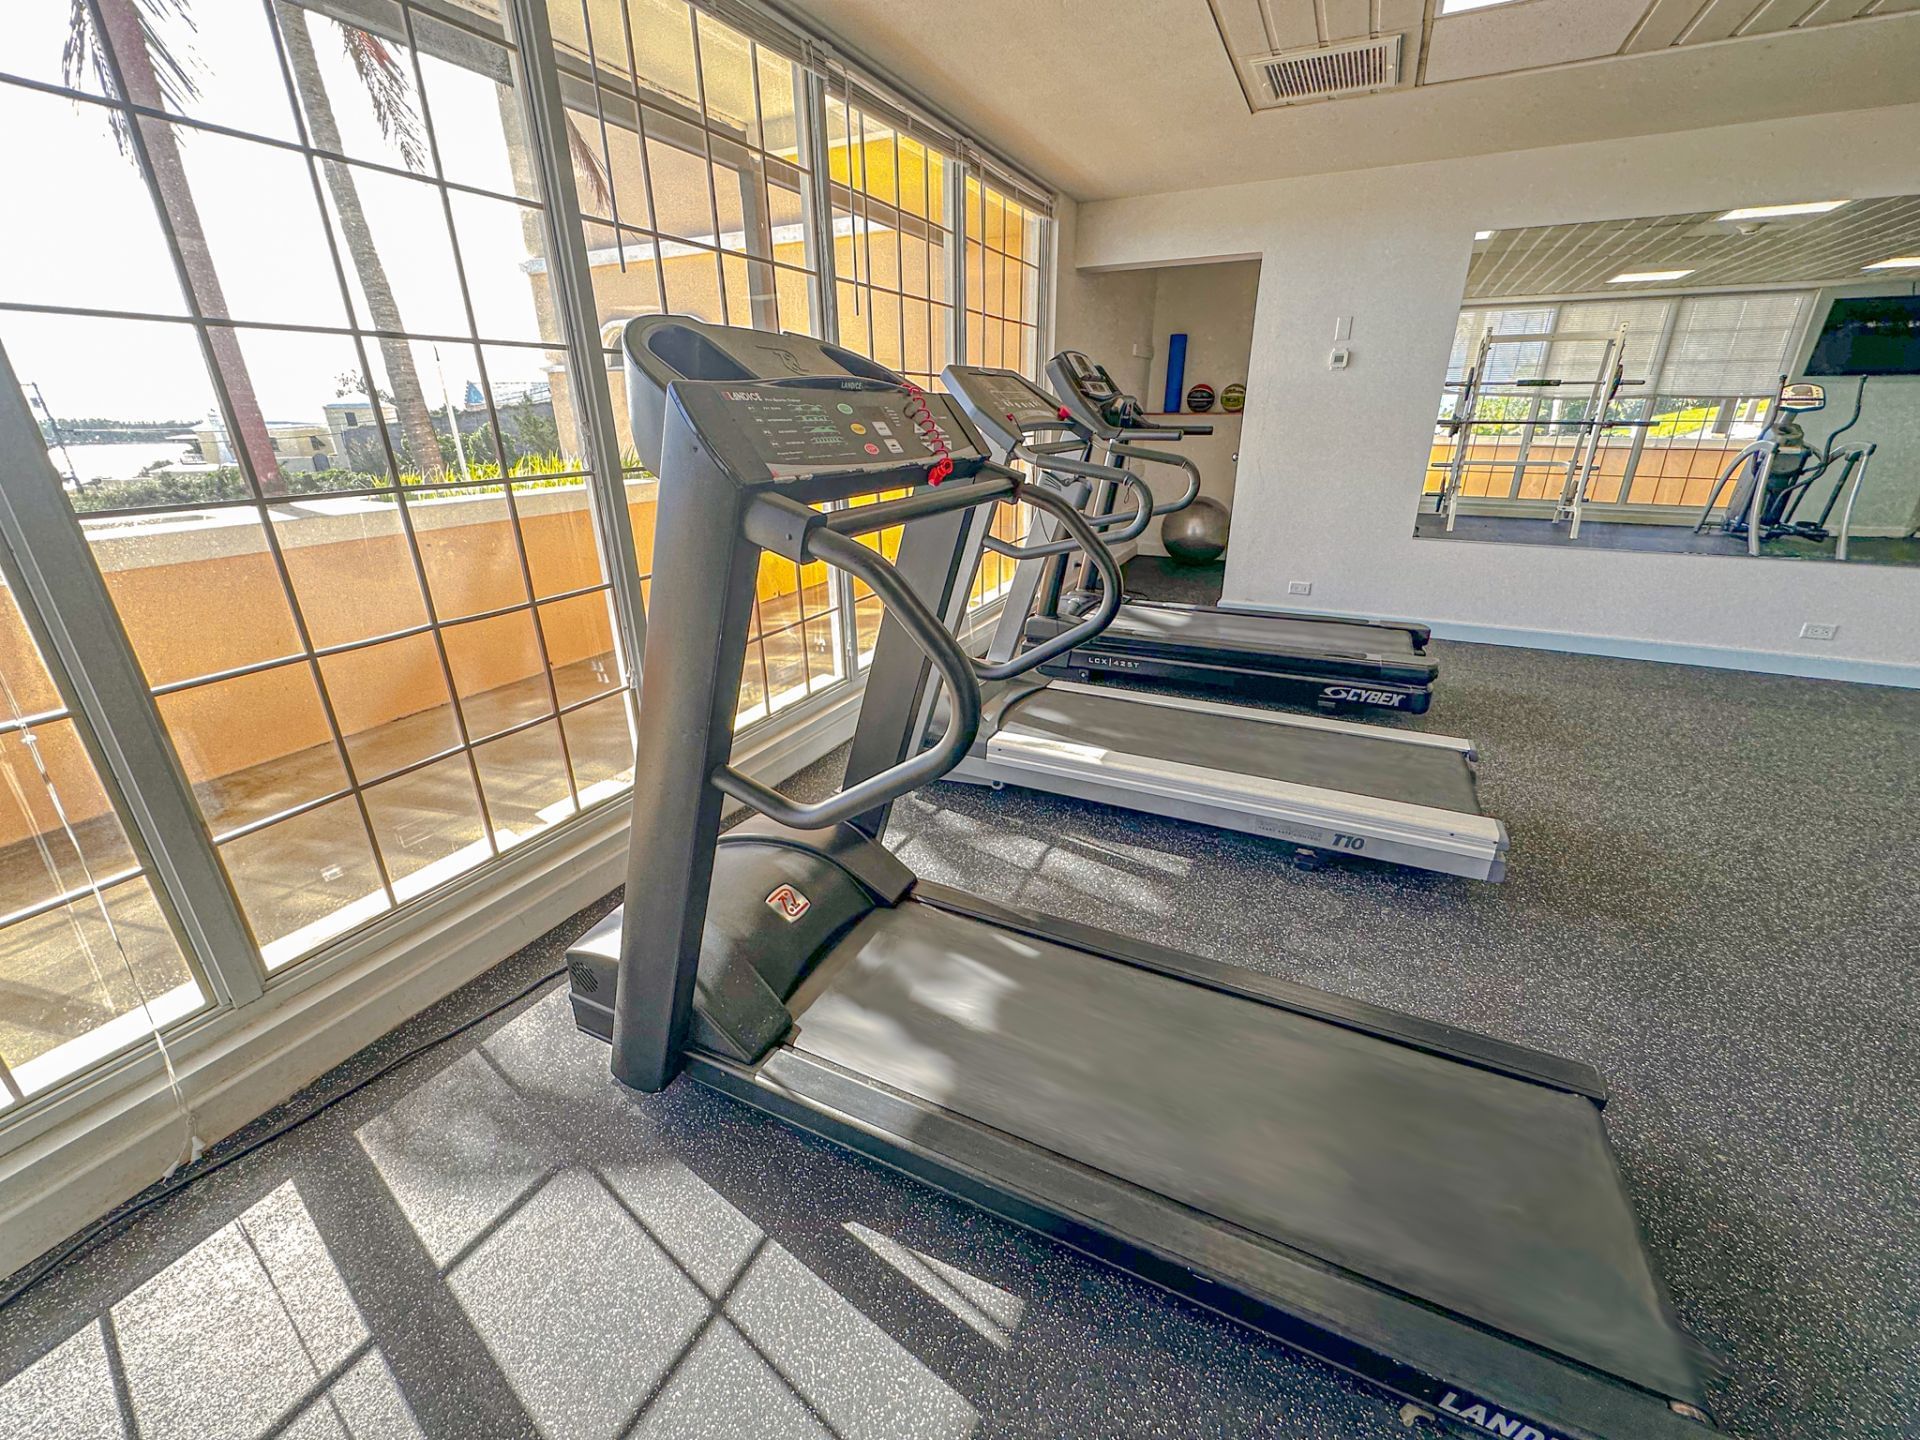 Exercise machines in the Gym at St George's Club Bermuda Hotel